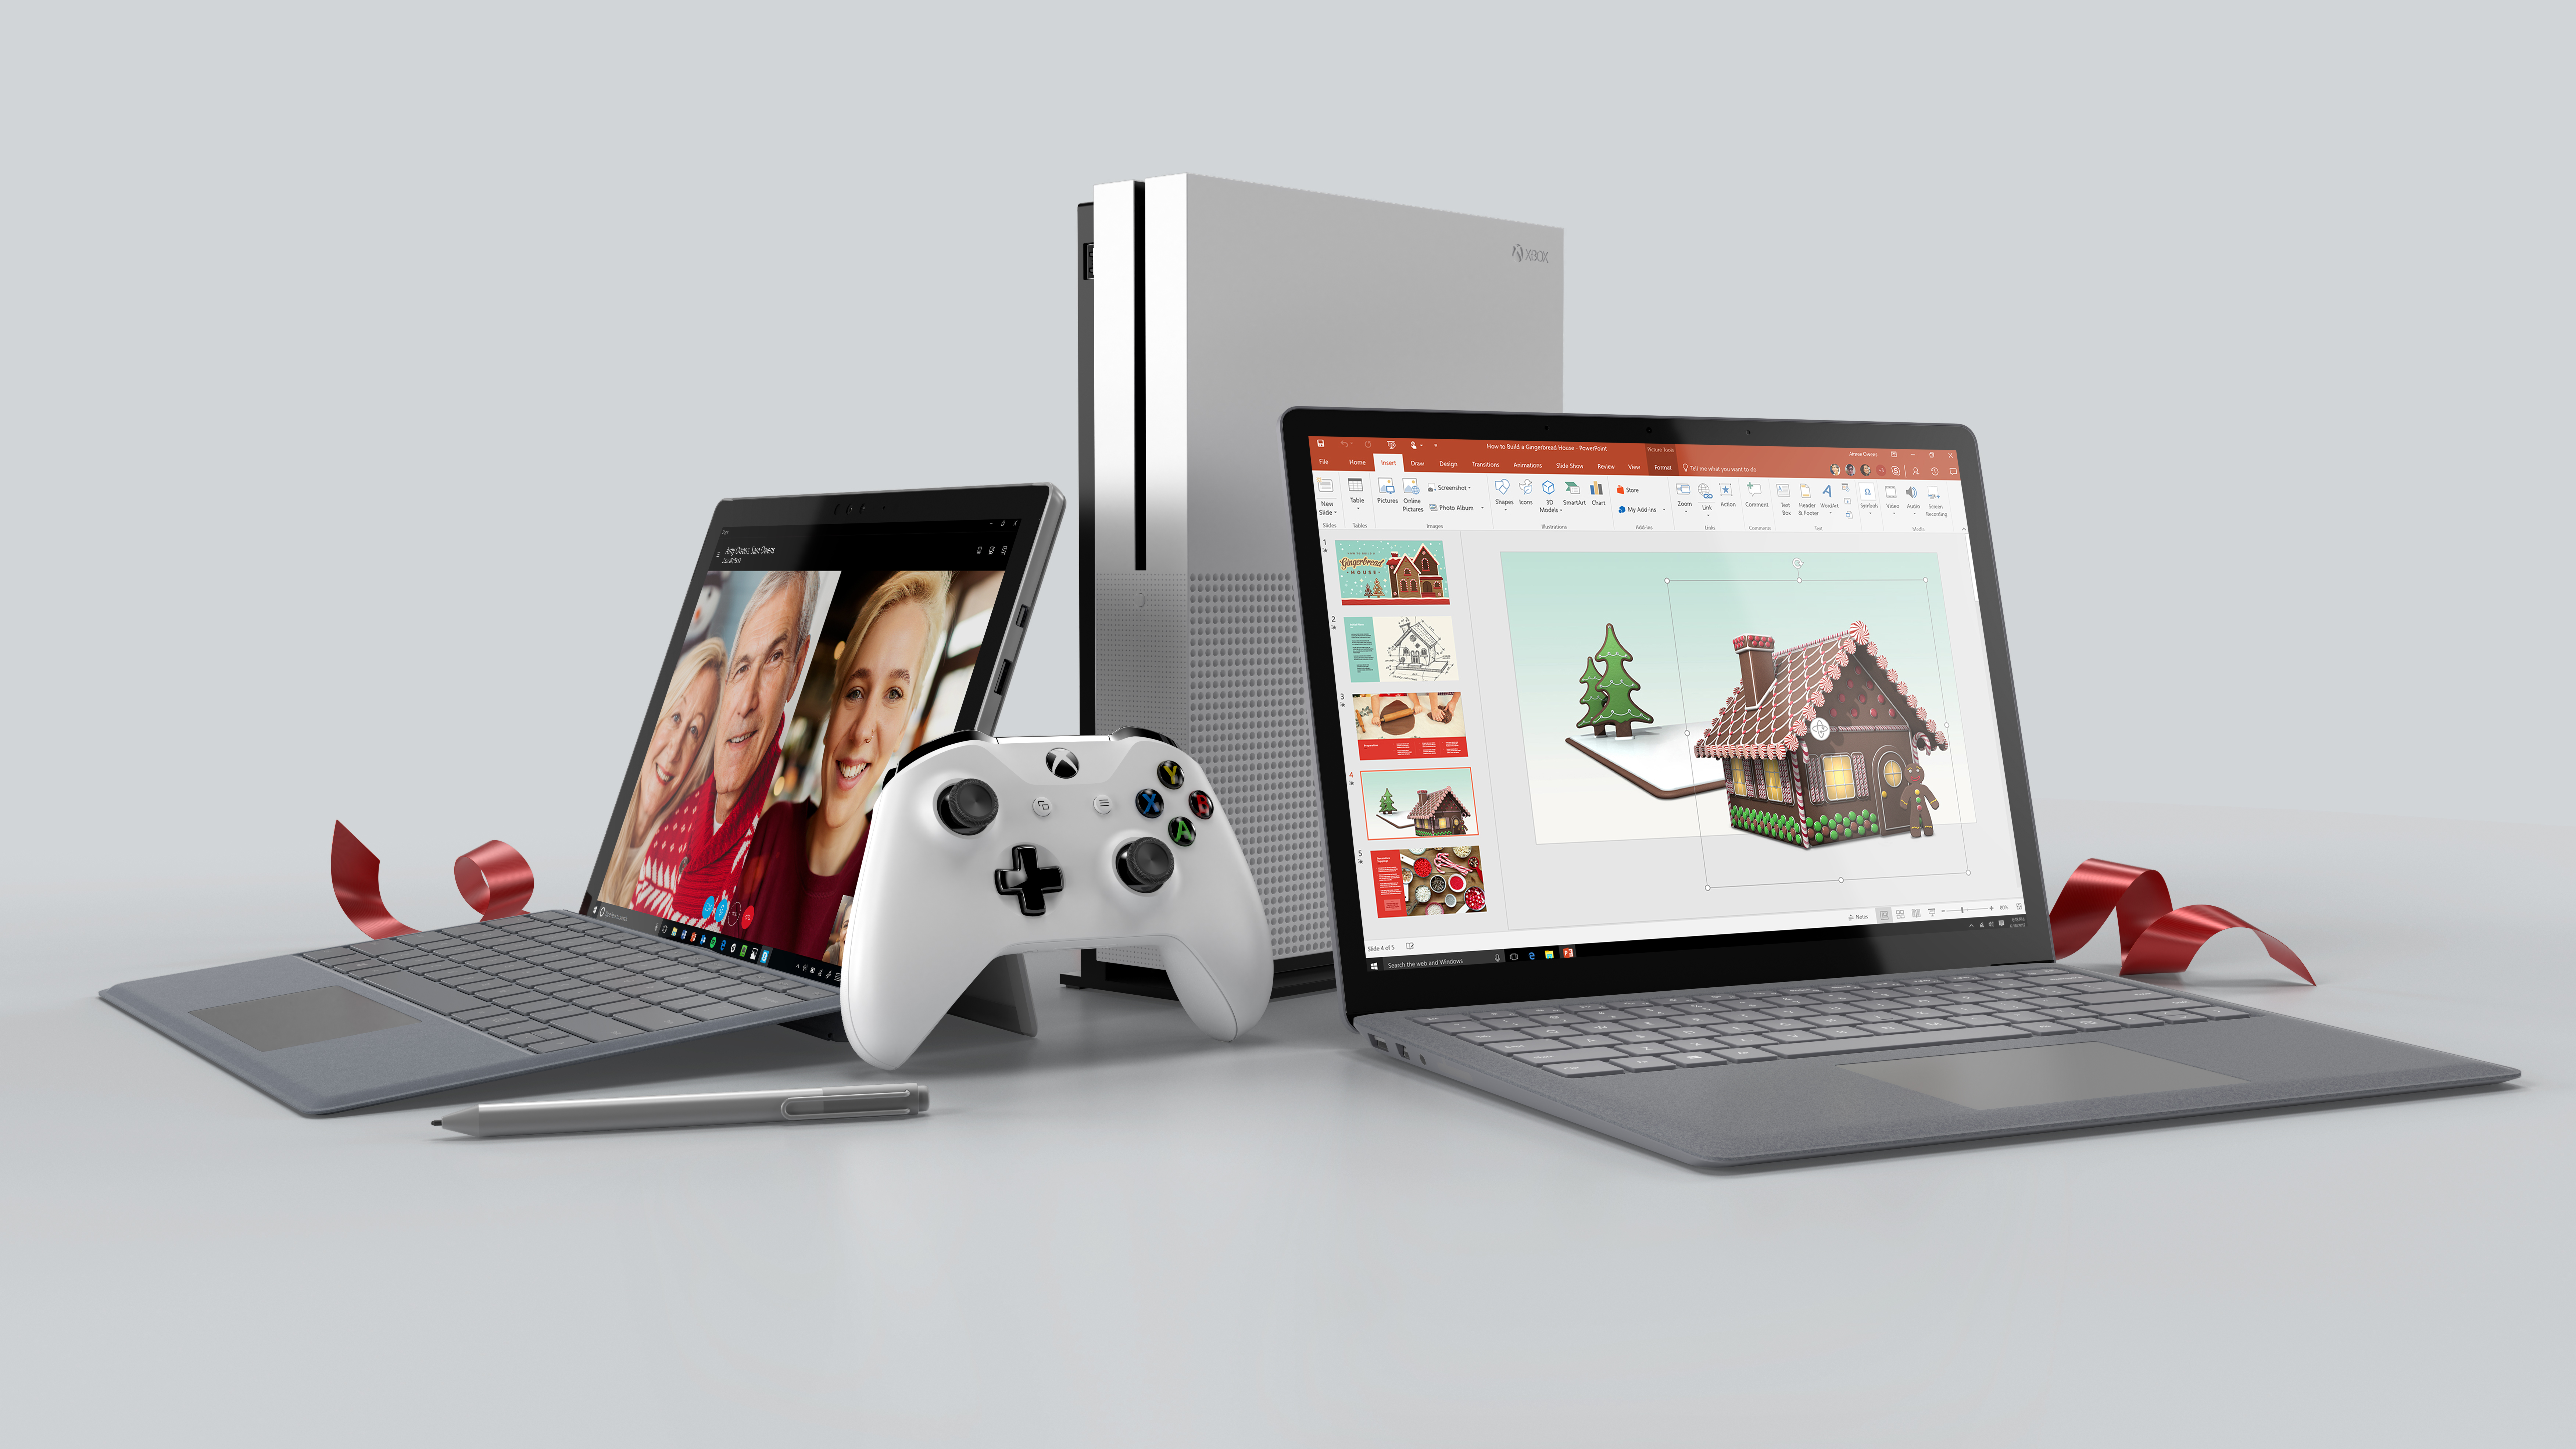 Surface, Xbox one S and an Xbox controller pictured together